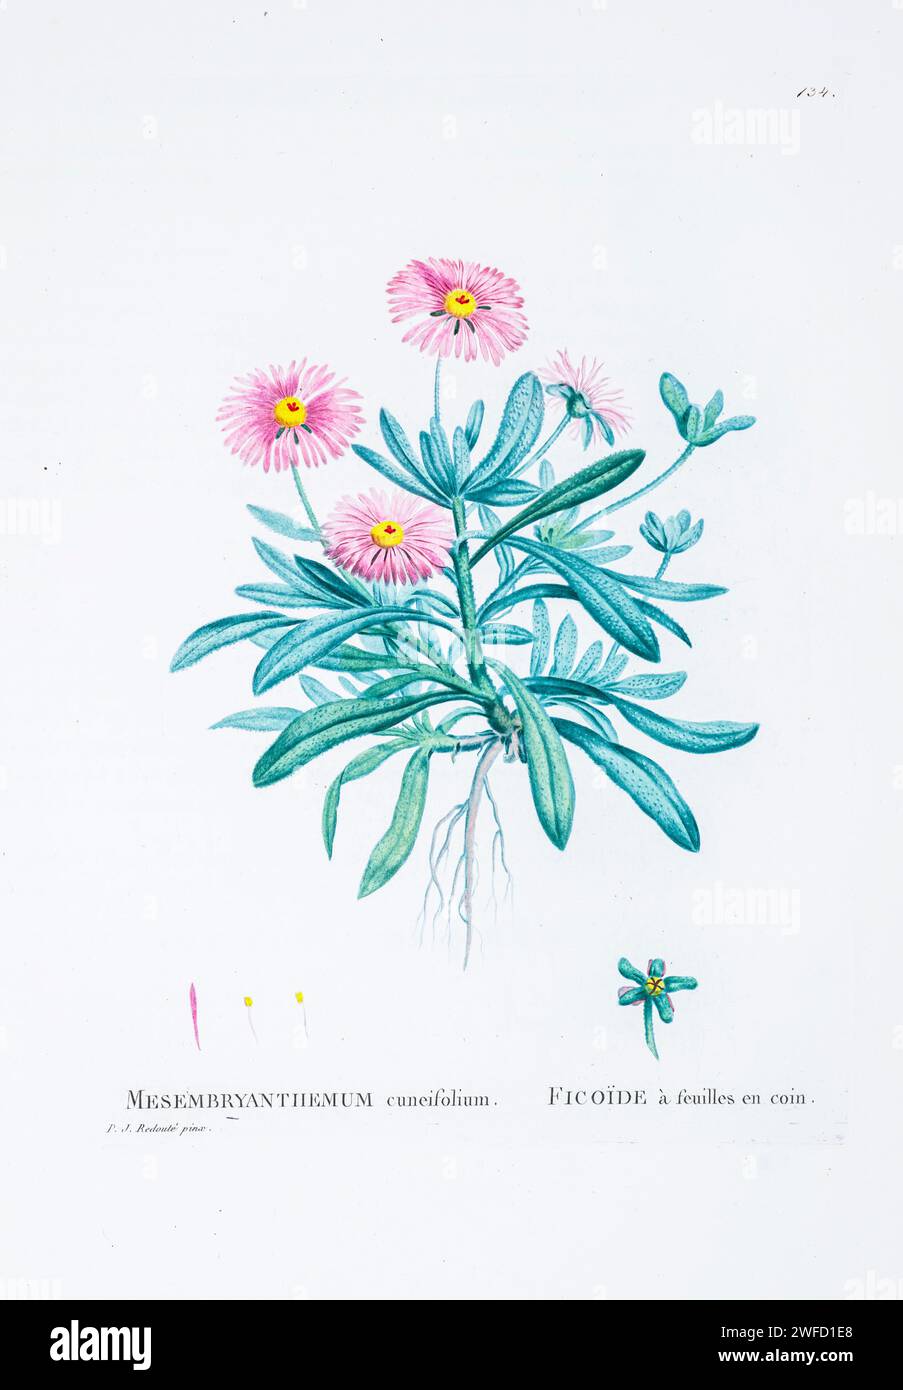 Micropterum cuneifolium (Jacq.) Schwant. Here As Mesembryanthemum cuneifolium from History of Succulent Plants [Plantarum historia succulentarum / Histoire des plantes grasses] painted by Pierre-Joseph Redouté and described by Augustin Pyramus de Candolle 1799 Cleretum bellidiforme, commonly called Livingstone daisy, Bokbaaivygie, or Buck Bay vygie, is a species of flowering plant in the family Aizoaceae, native to the Cape Peninsula in South Africa. It is a low-growing succulent annual growing to 25 cm, and cultivated for its iridescent, many-petalled, daisy-like blooms Stock Photo